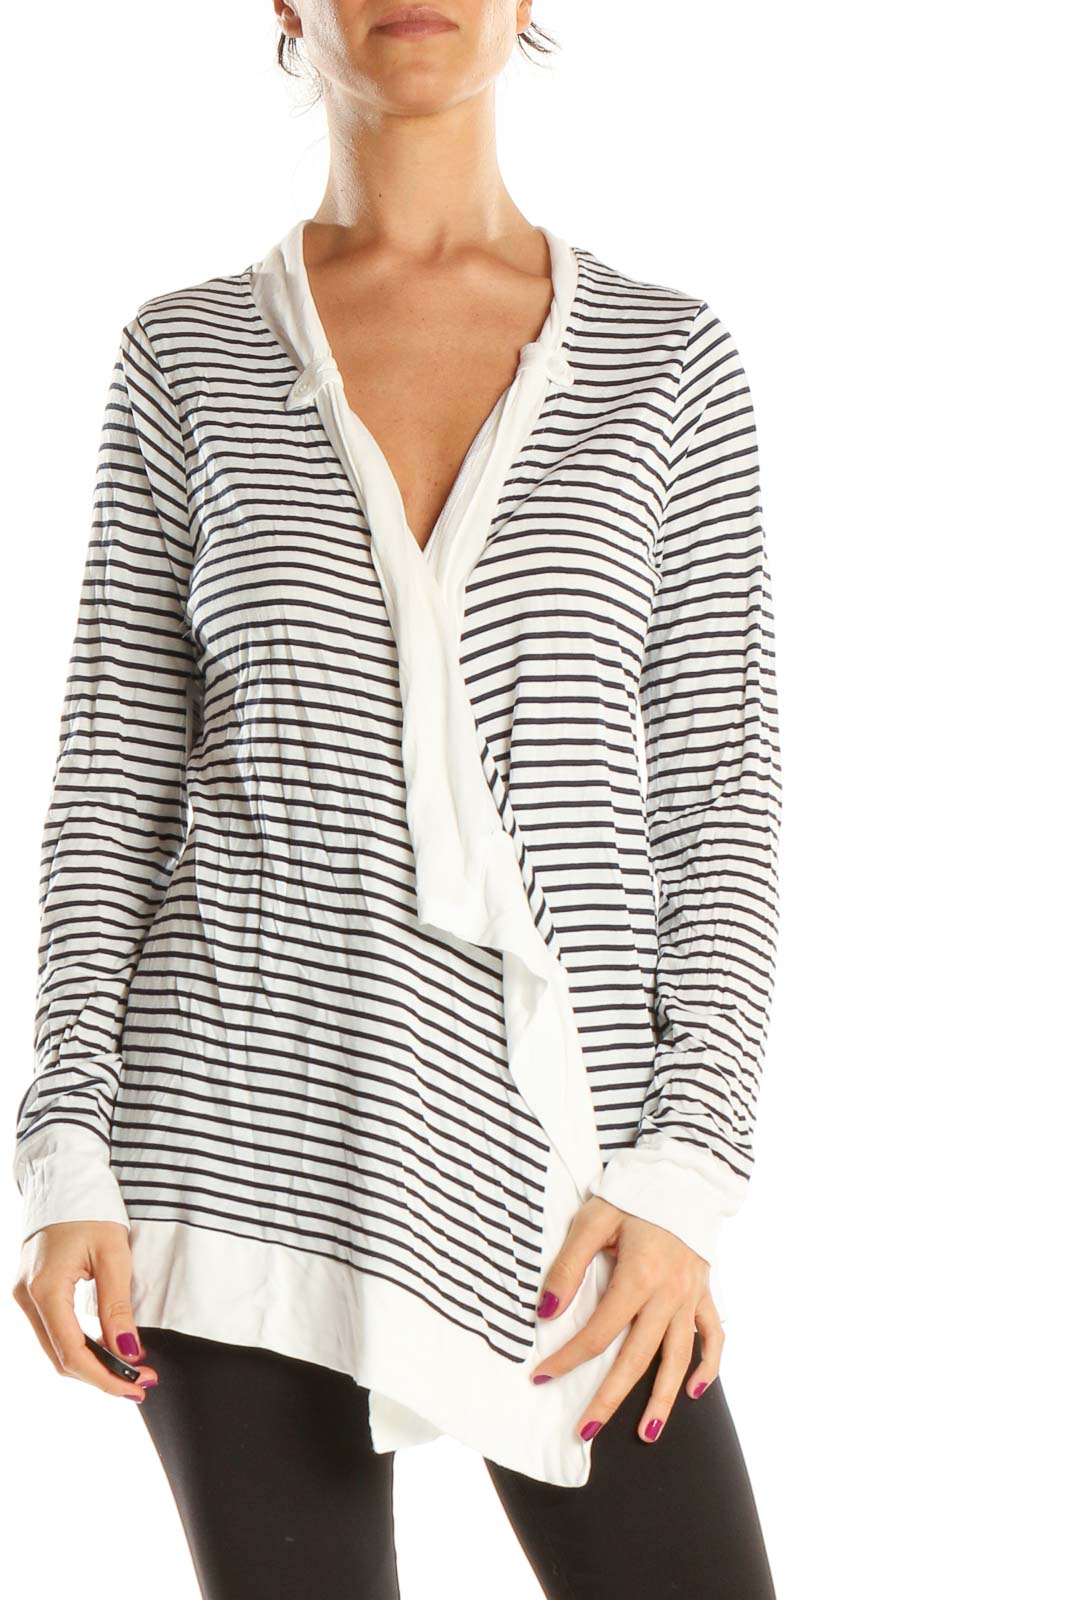 White Striped All Day Wear Blouse Front